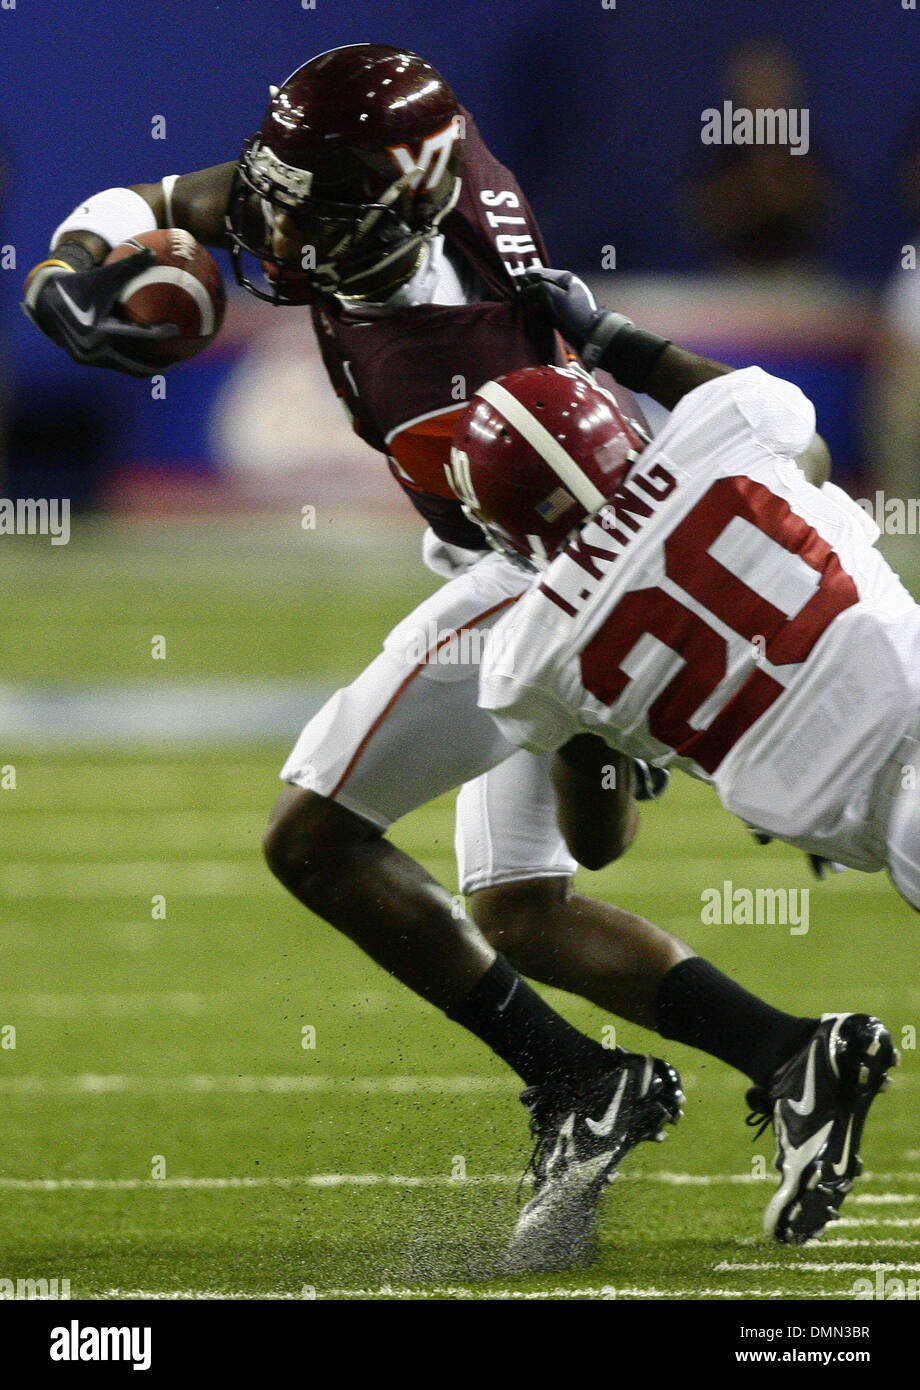 Sep 05, 2009 - Atlanta, Georgia, USA - NCAA Football - Virginia Tech's DYRELL ROBERTS, left, fights off Alabama's TYRONE KING (20) during the first half of the schools' game in the Georgia Dome (Credit Image: © Josh D. Weiss/ZUMA Press) Stock Photo